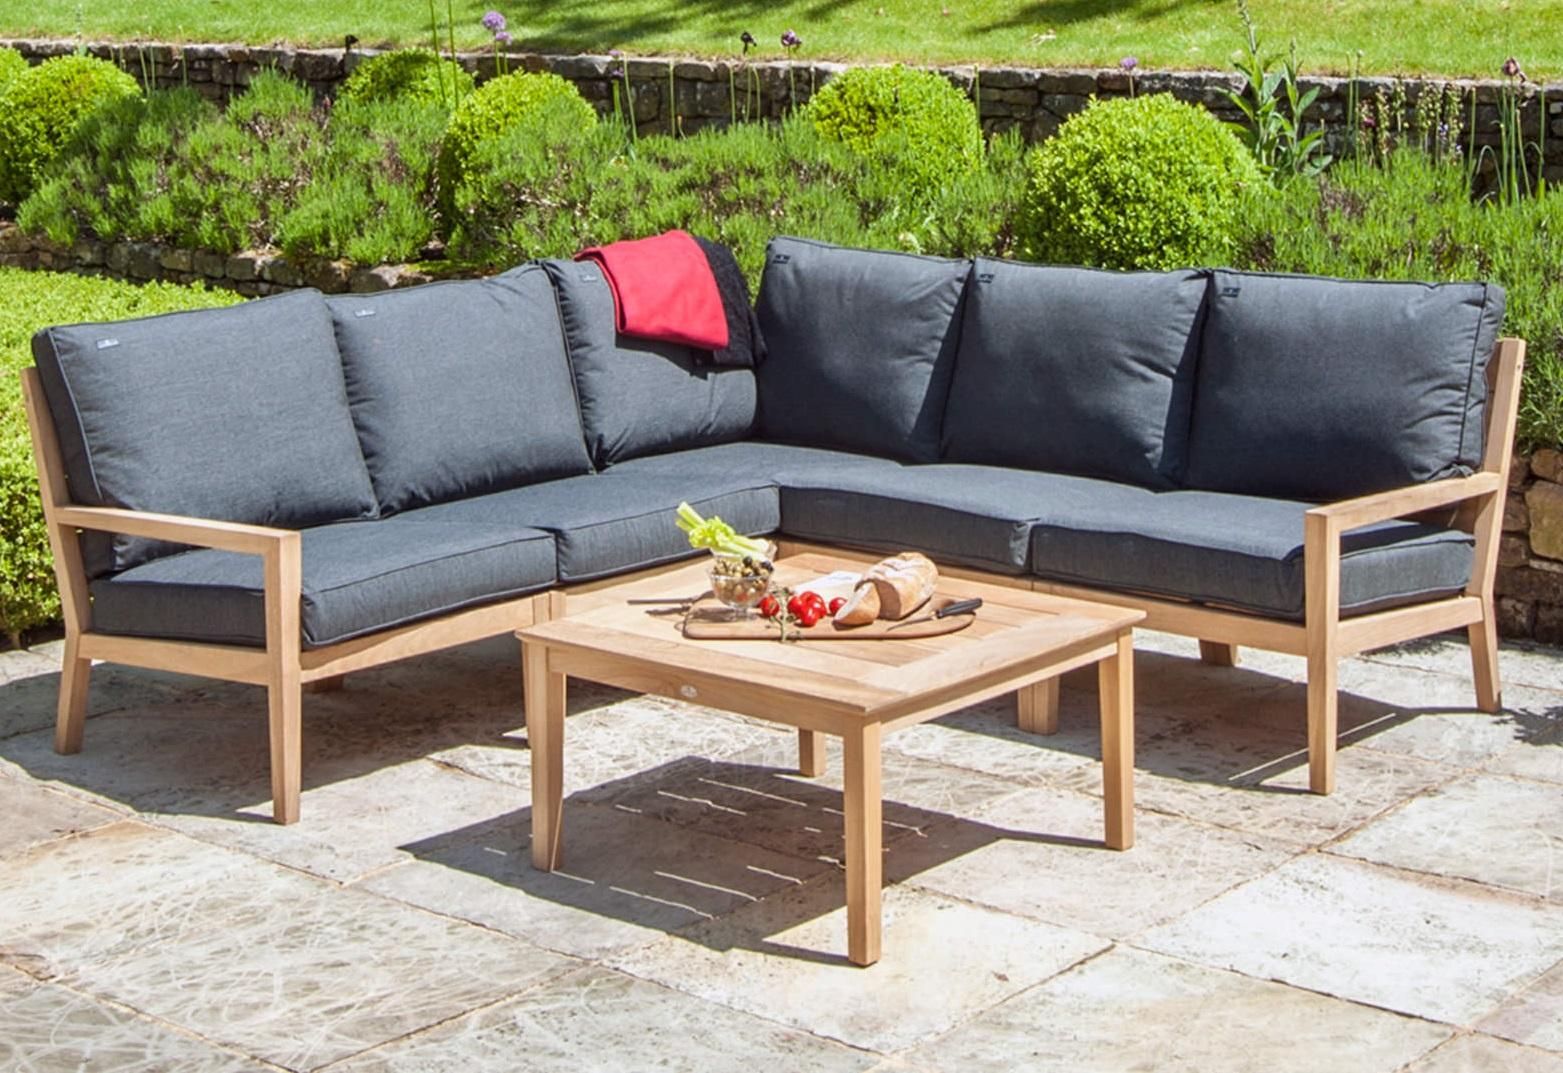 Garden Lounge Corner Sofa Set In Roble Hardwood With Grey Cushions With Wood Sofa Cushioned Outdoor Garden (View 7 of 15)